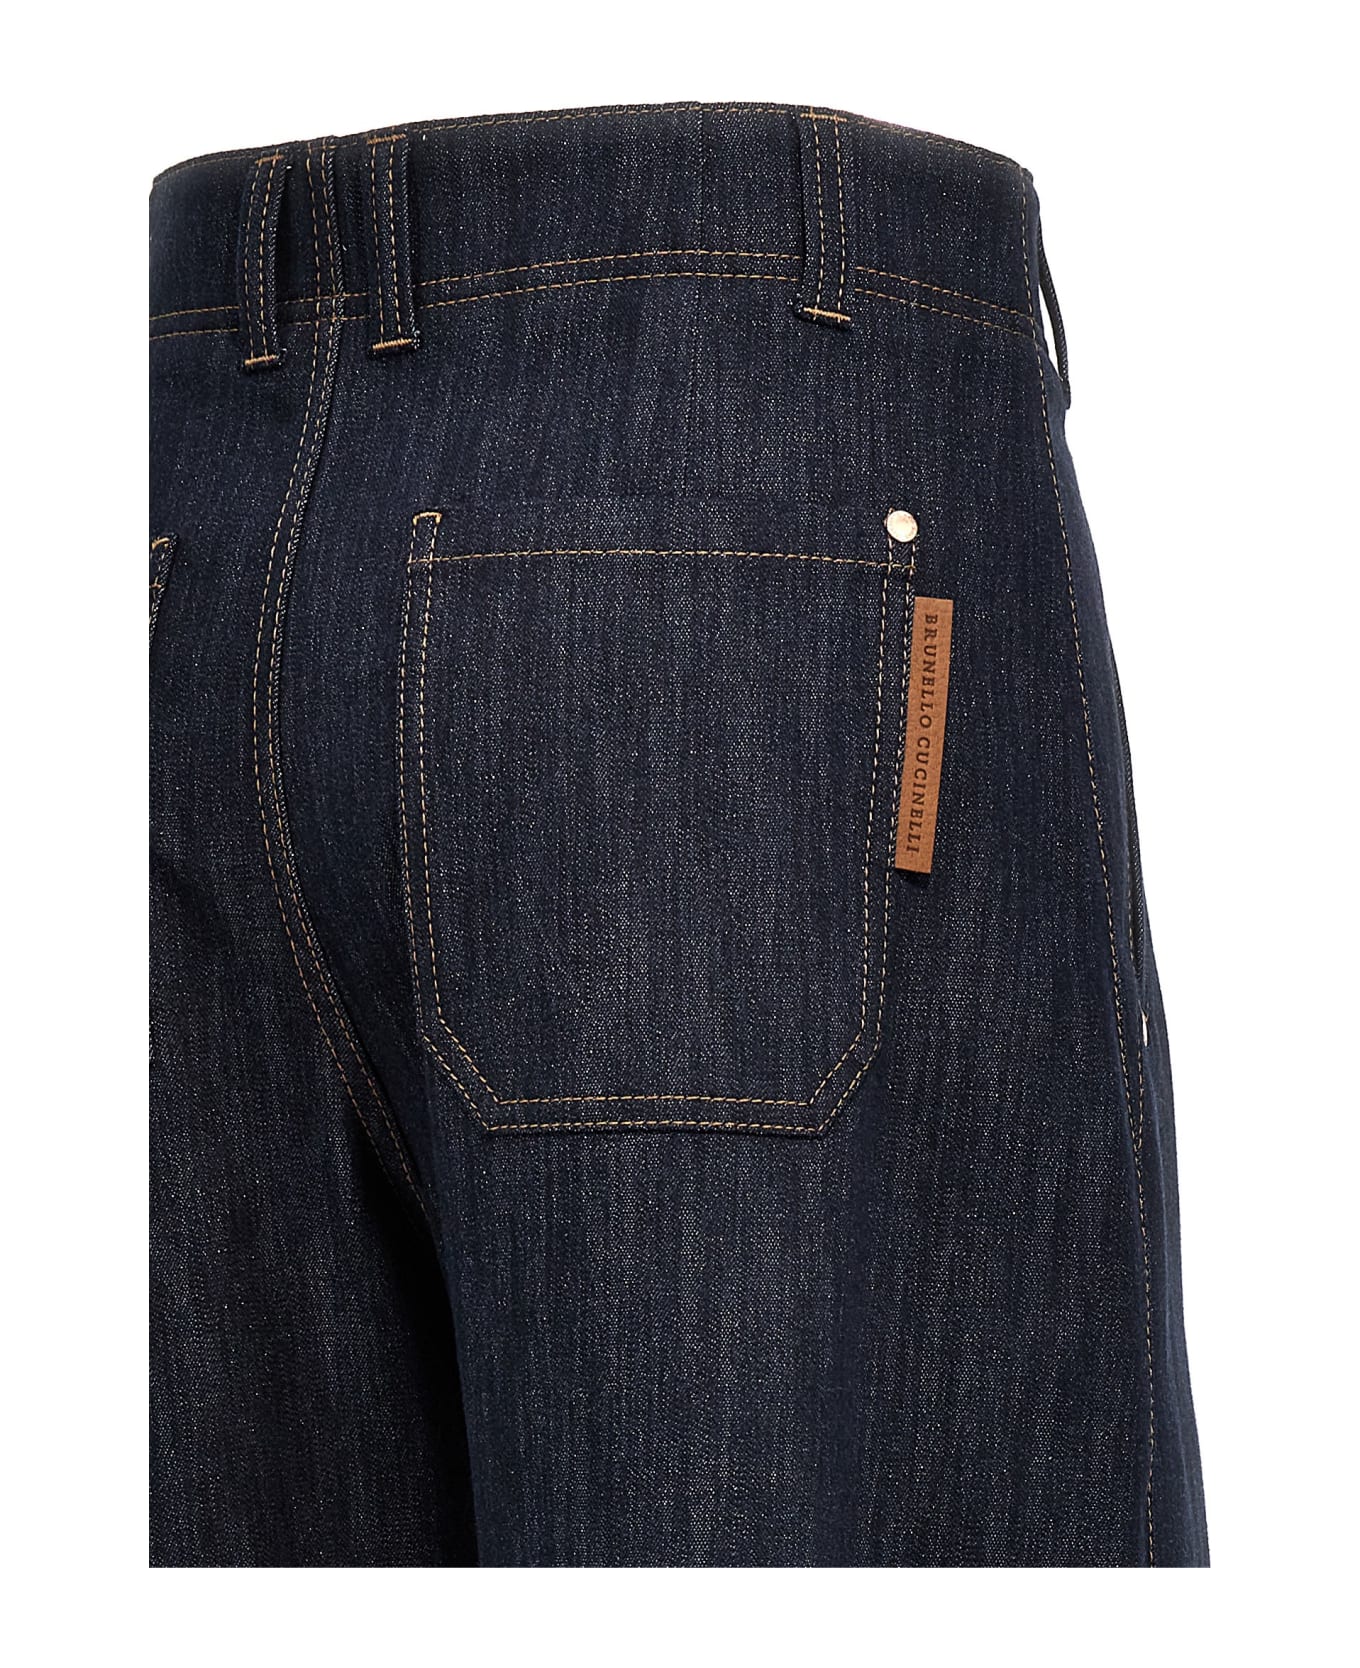 Brunello Cucinelli 'curved' Jeans - Blue デニム